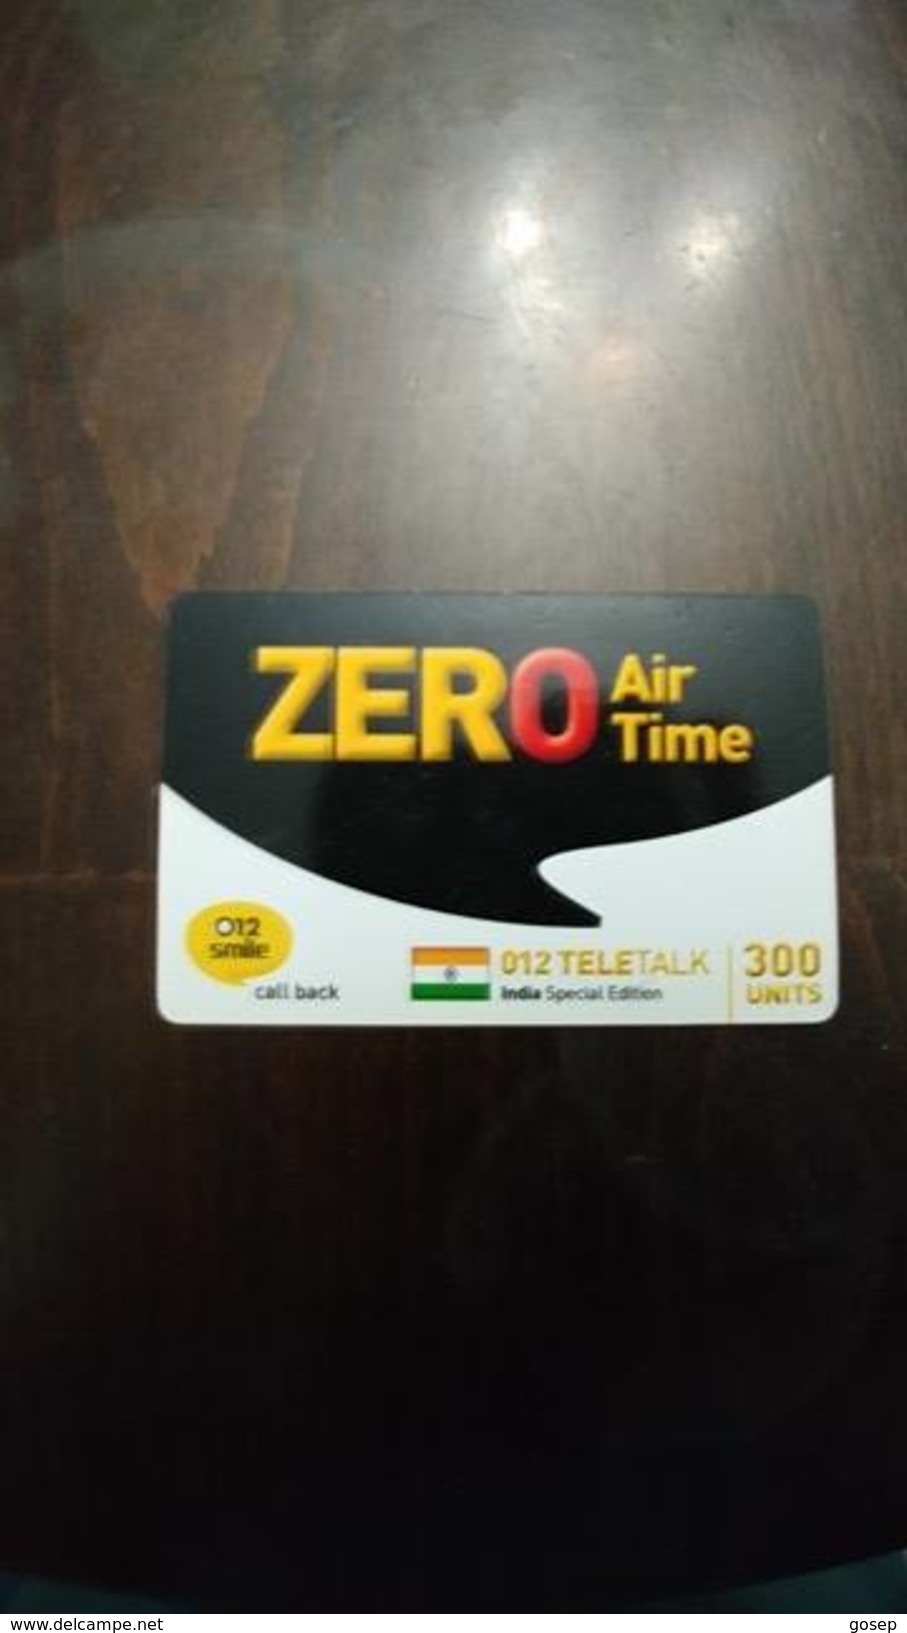 Israel-ZERO-air Time-(28)-012 Teletalk-india Special Edition-(300units)-(012smile Call Back)-out Side - India